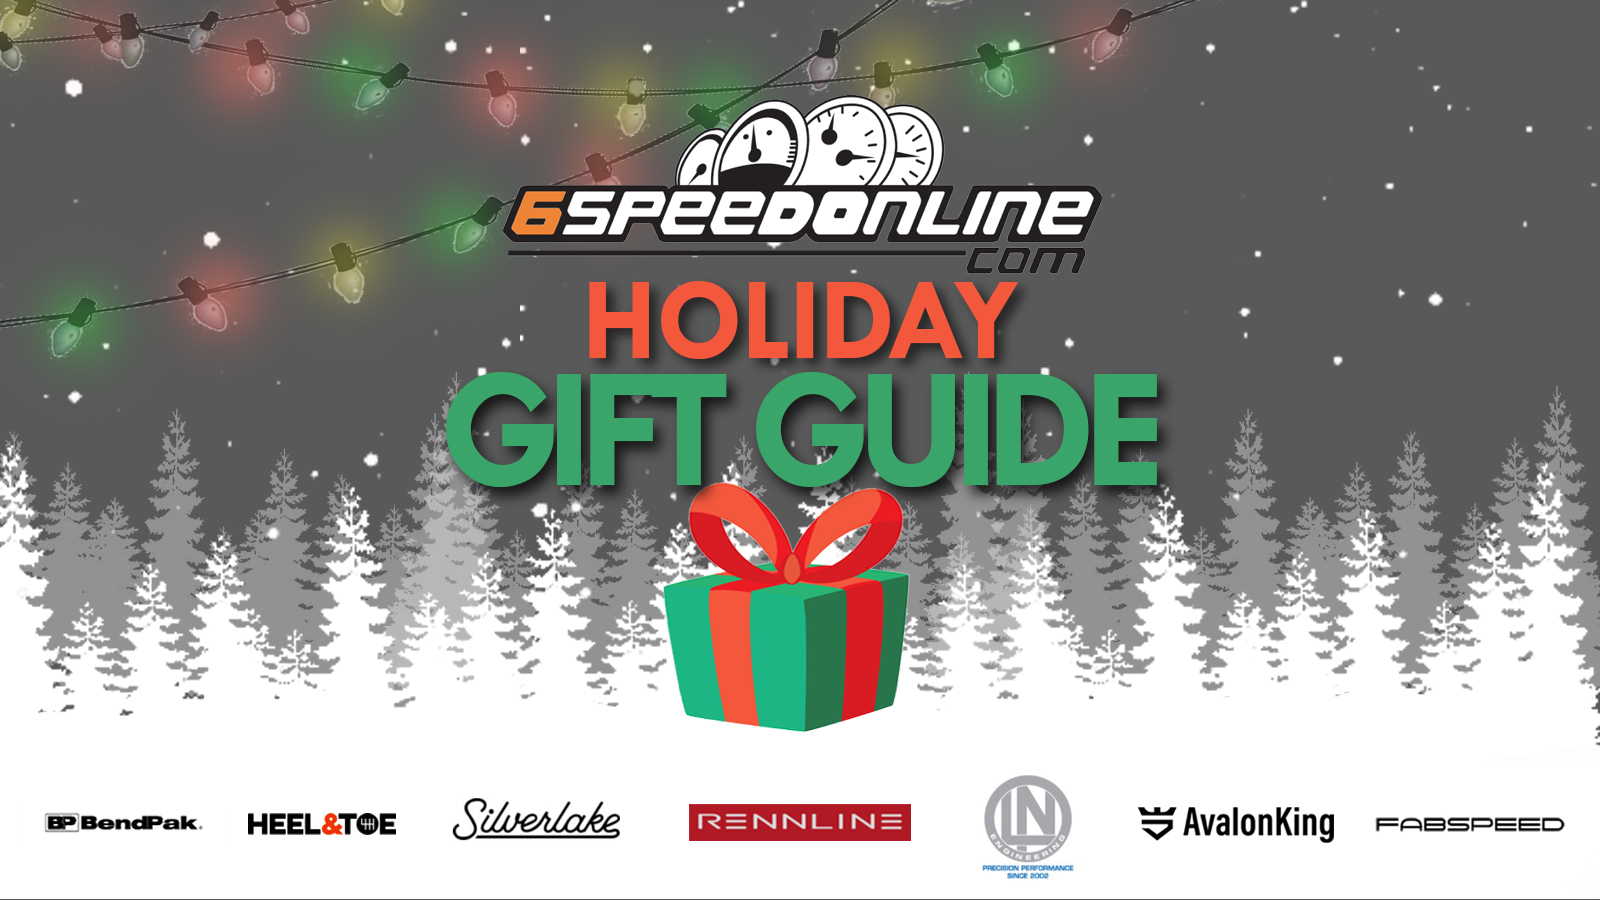 6Speed Online Holiday Gift Guide 2021